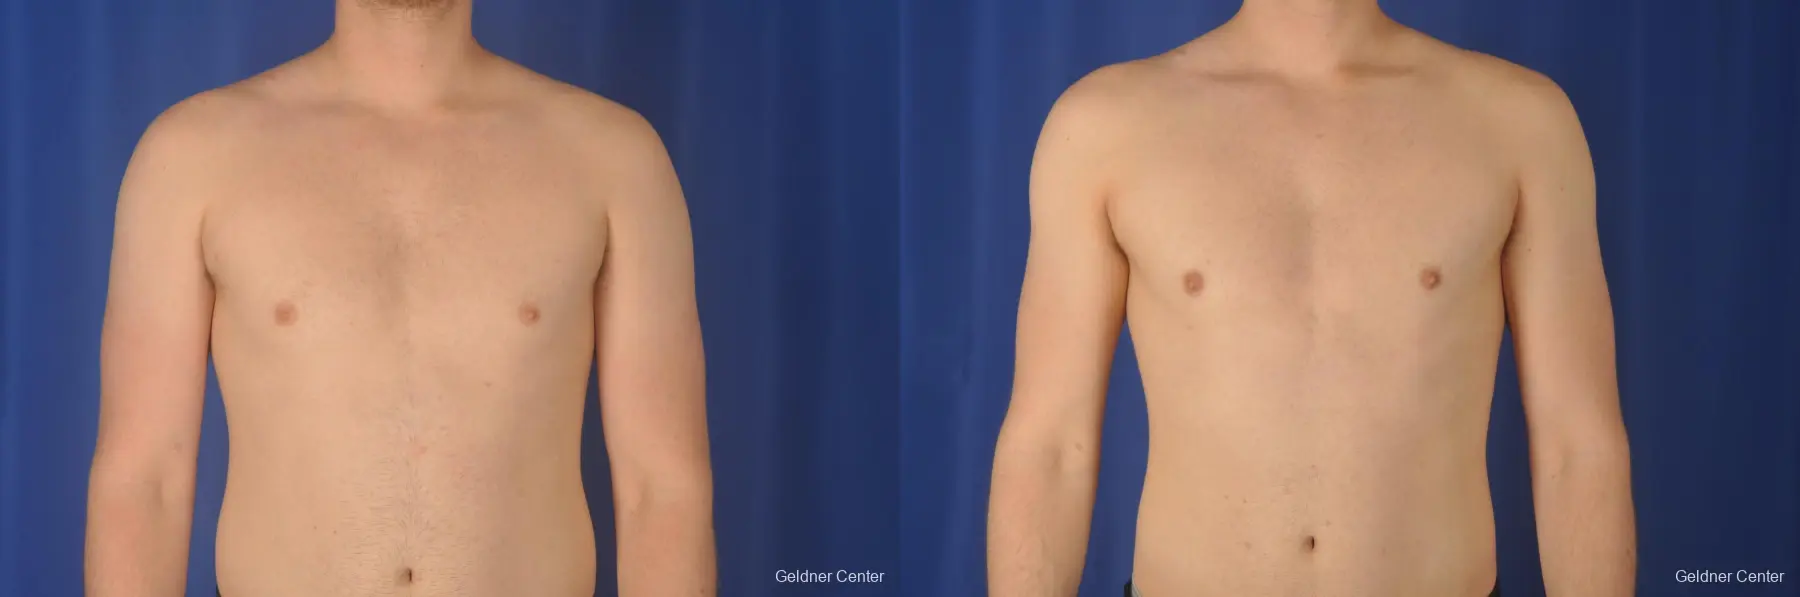 Gynecomastia: Patient 10 - Before and After 1